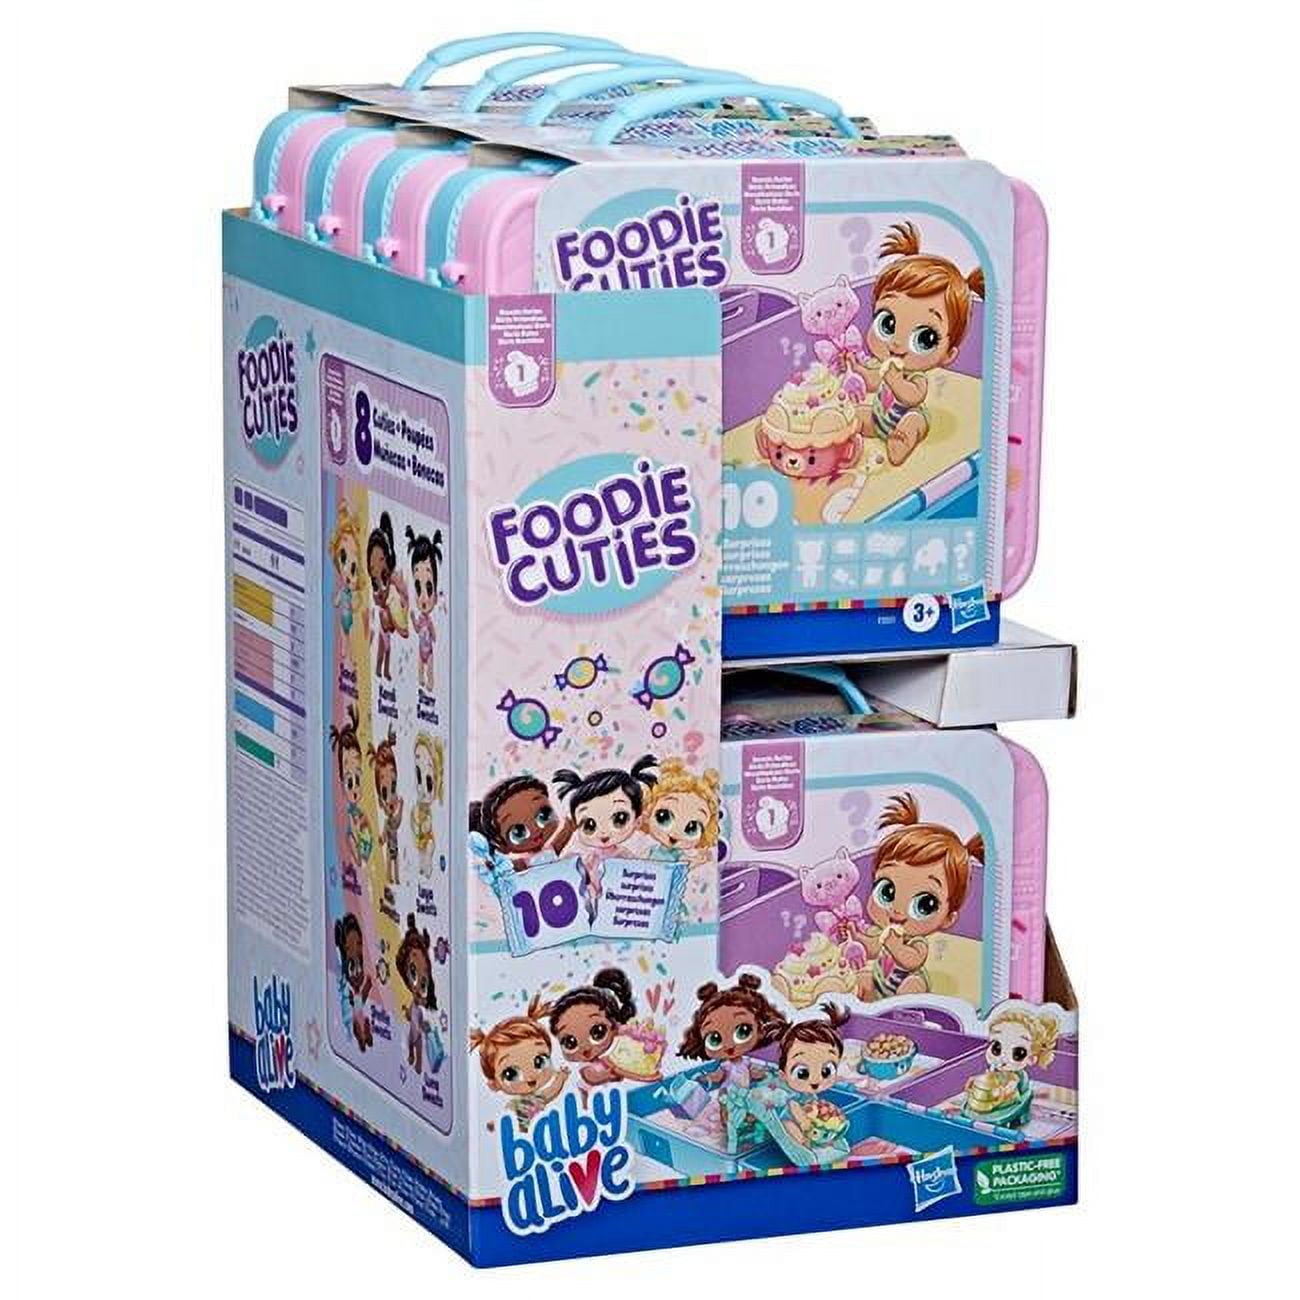 Picture of Hasbro HSBF3551 Baby Alive Foodie Cuties PDQ Toy - 8 Piece